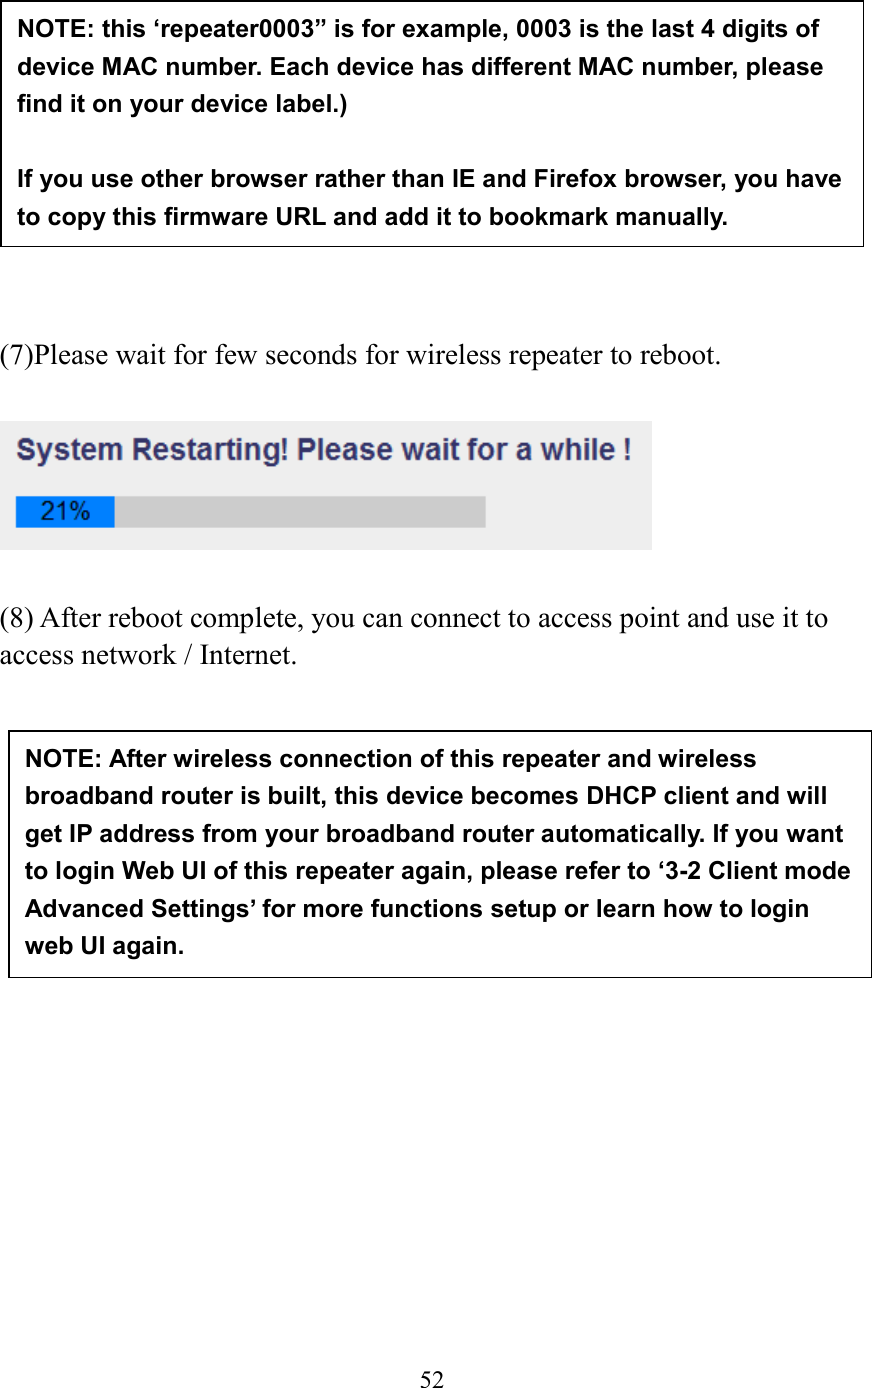  52             (7)Please wait for few seconds for wireless repeater to reboot.      (8) After reboot complete, you can connect to access point and use it to access network / Internet.               NOTE: After wireless connection of this repeater and wireless broadband router is built, this device becomes DHCP client and will get IP address from your broadband router automatically. If you want to login Web UI of this repeater again, please refer to ‘3-2 Client mode Advanced Settings’ for more functions setup or learn how to login web UI again. NOTE: this ‘repeater0003” is for example, 0003 is the last 4 digits of device MAC number. Each device has different MAC number, please find it on your device label.)  If you use other browser rather than IE and Firefox browser, you have to copy this firmware URL and add it to bookmark manually. 